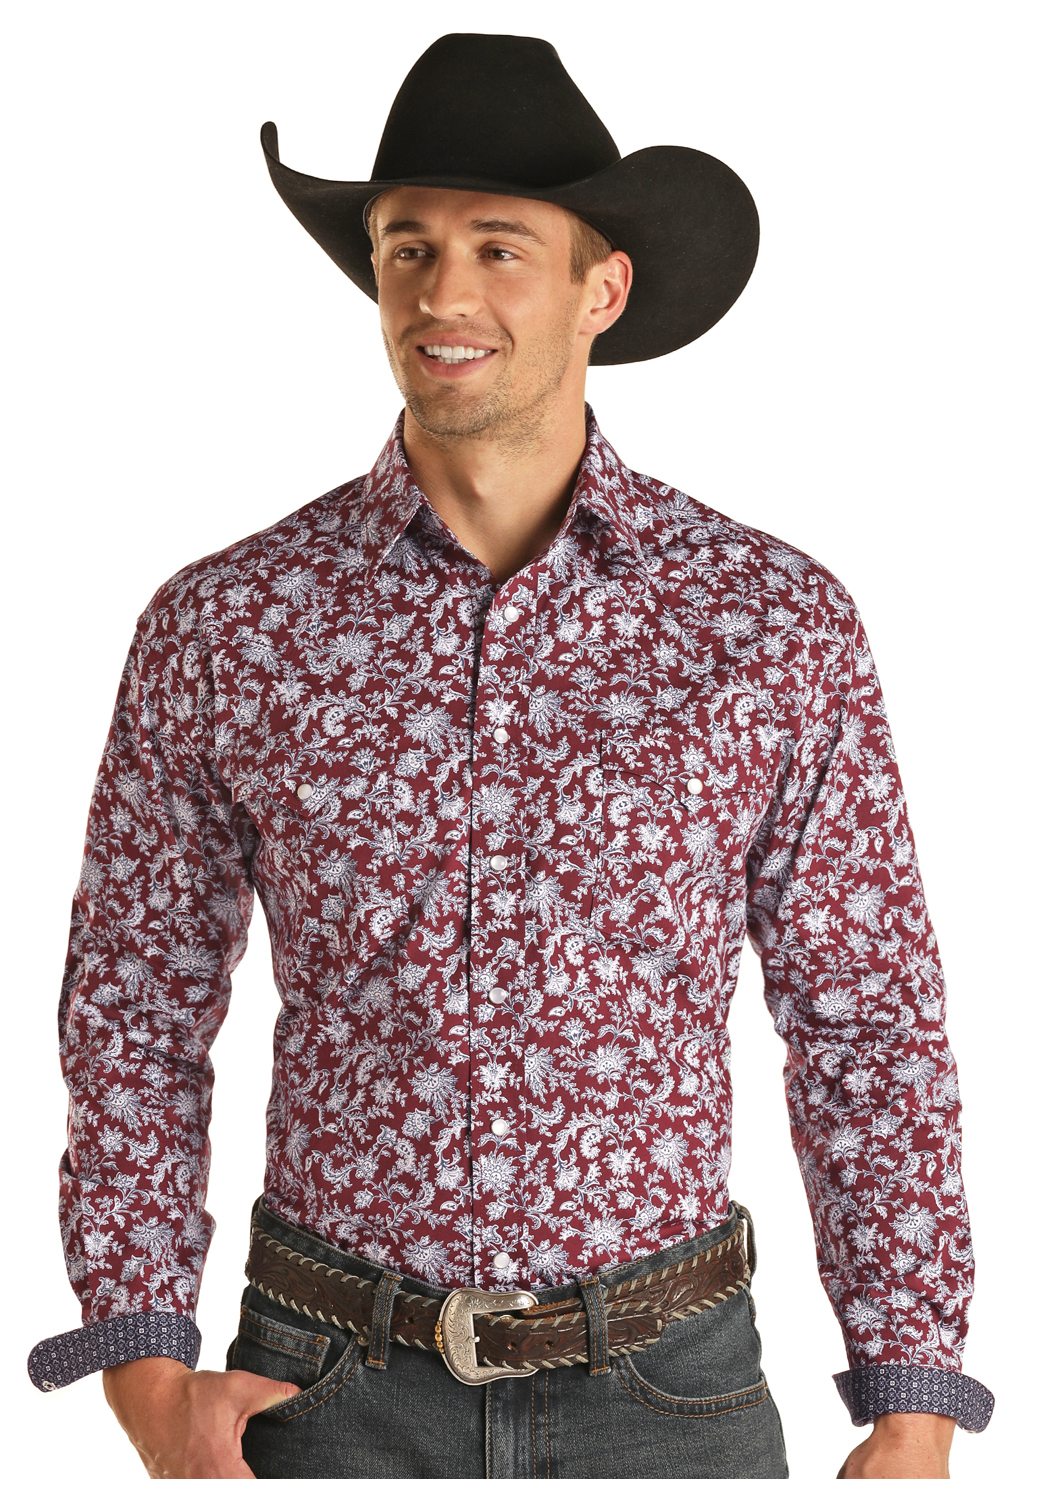 Men's Western Snap Shirts  Snap Front Western Style Shirts for Men